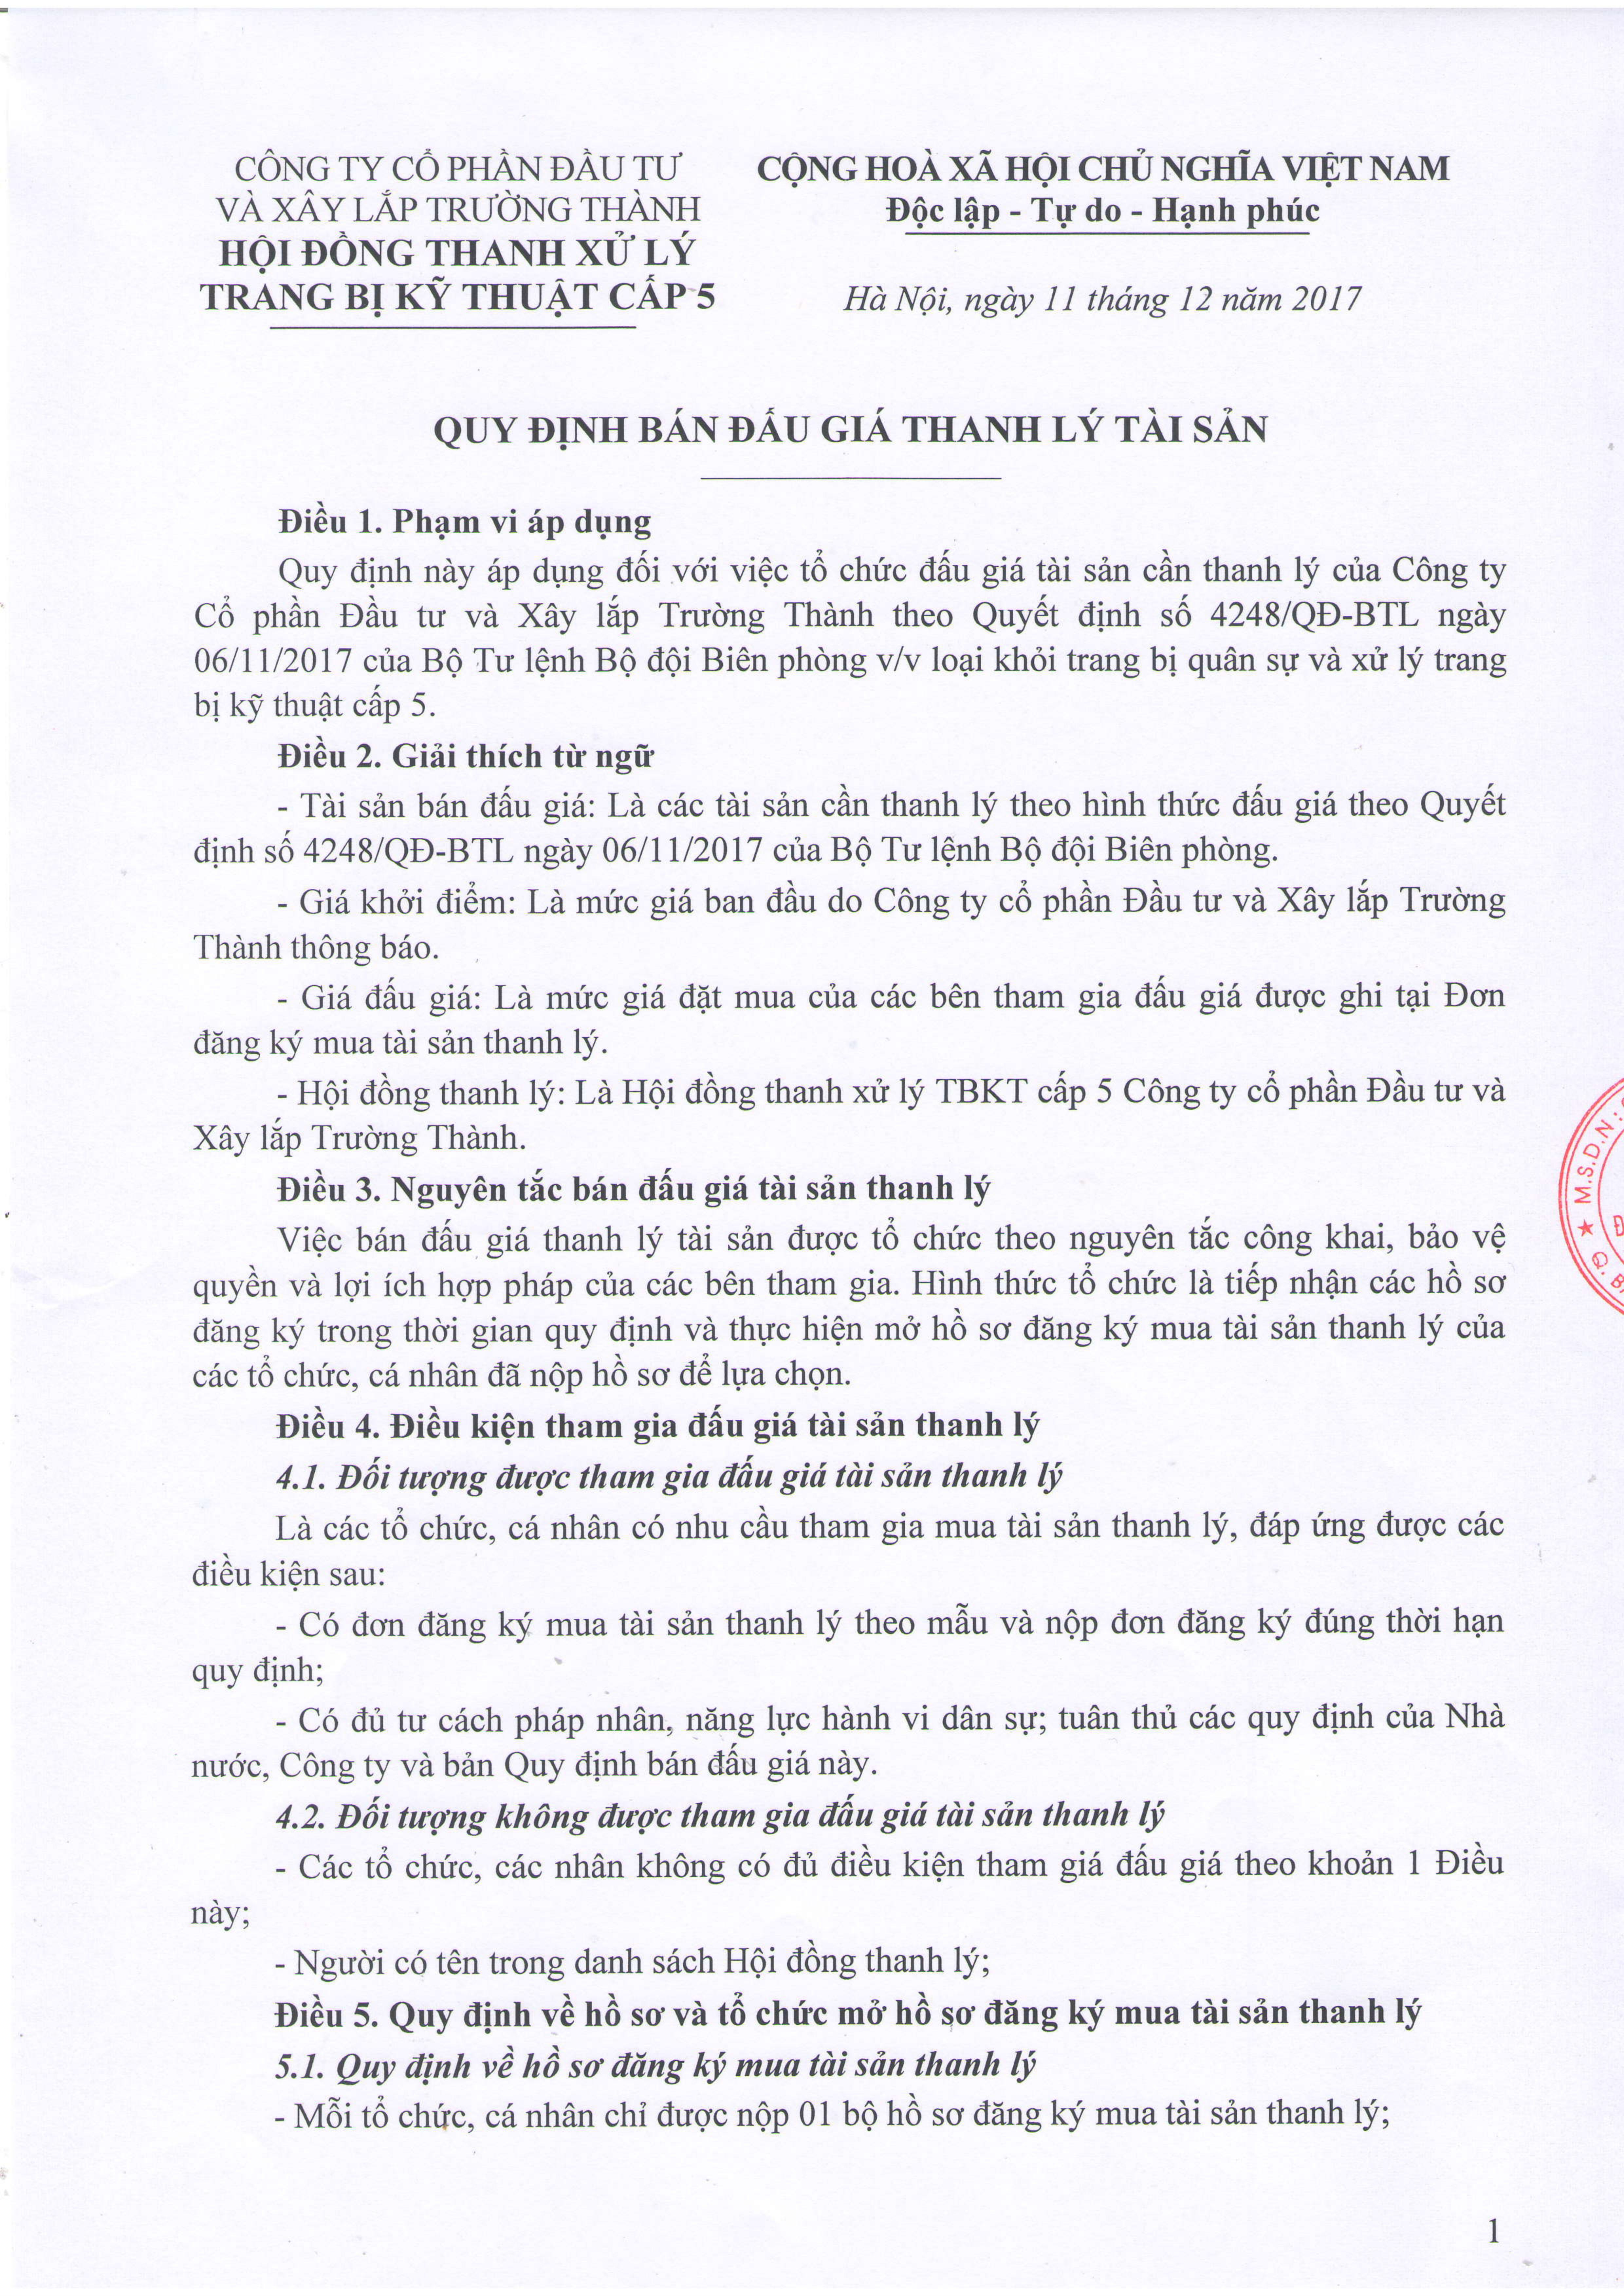 quy dinh ban dau gia thanh ly TSjpg_Page1